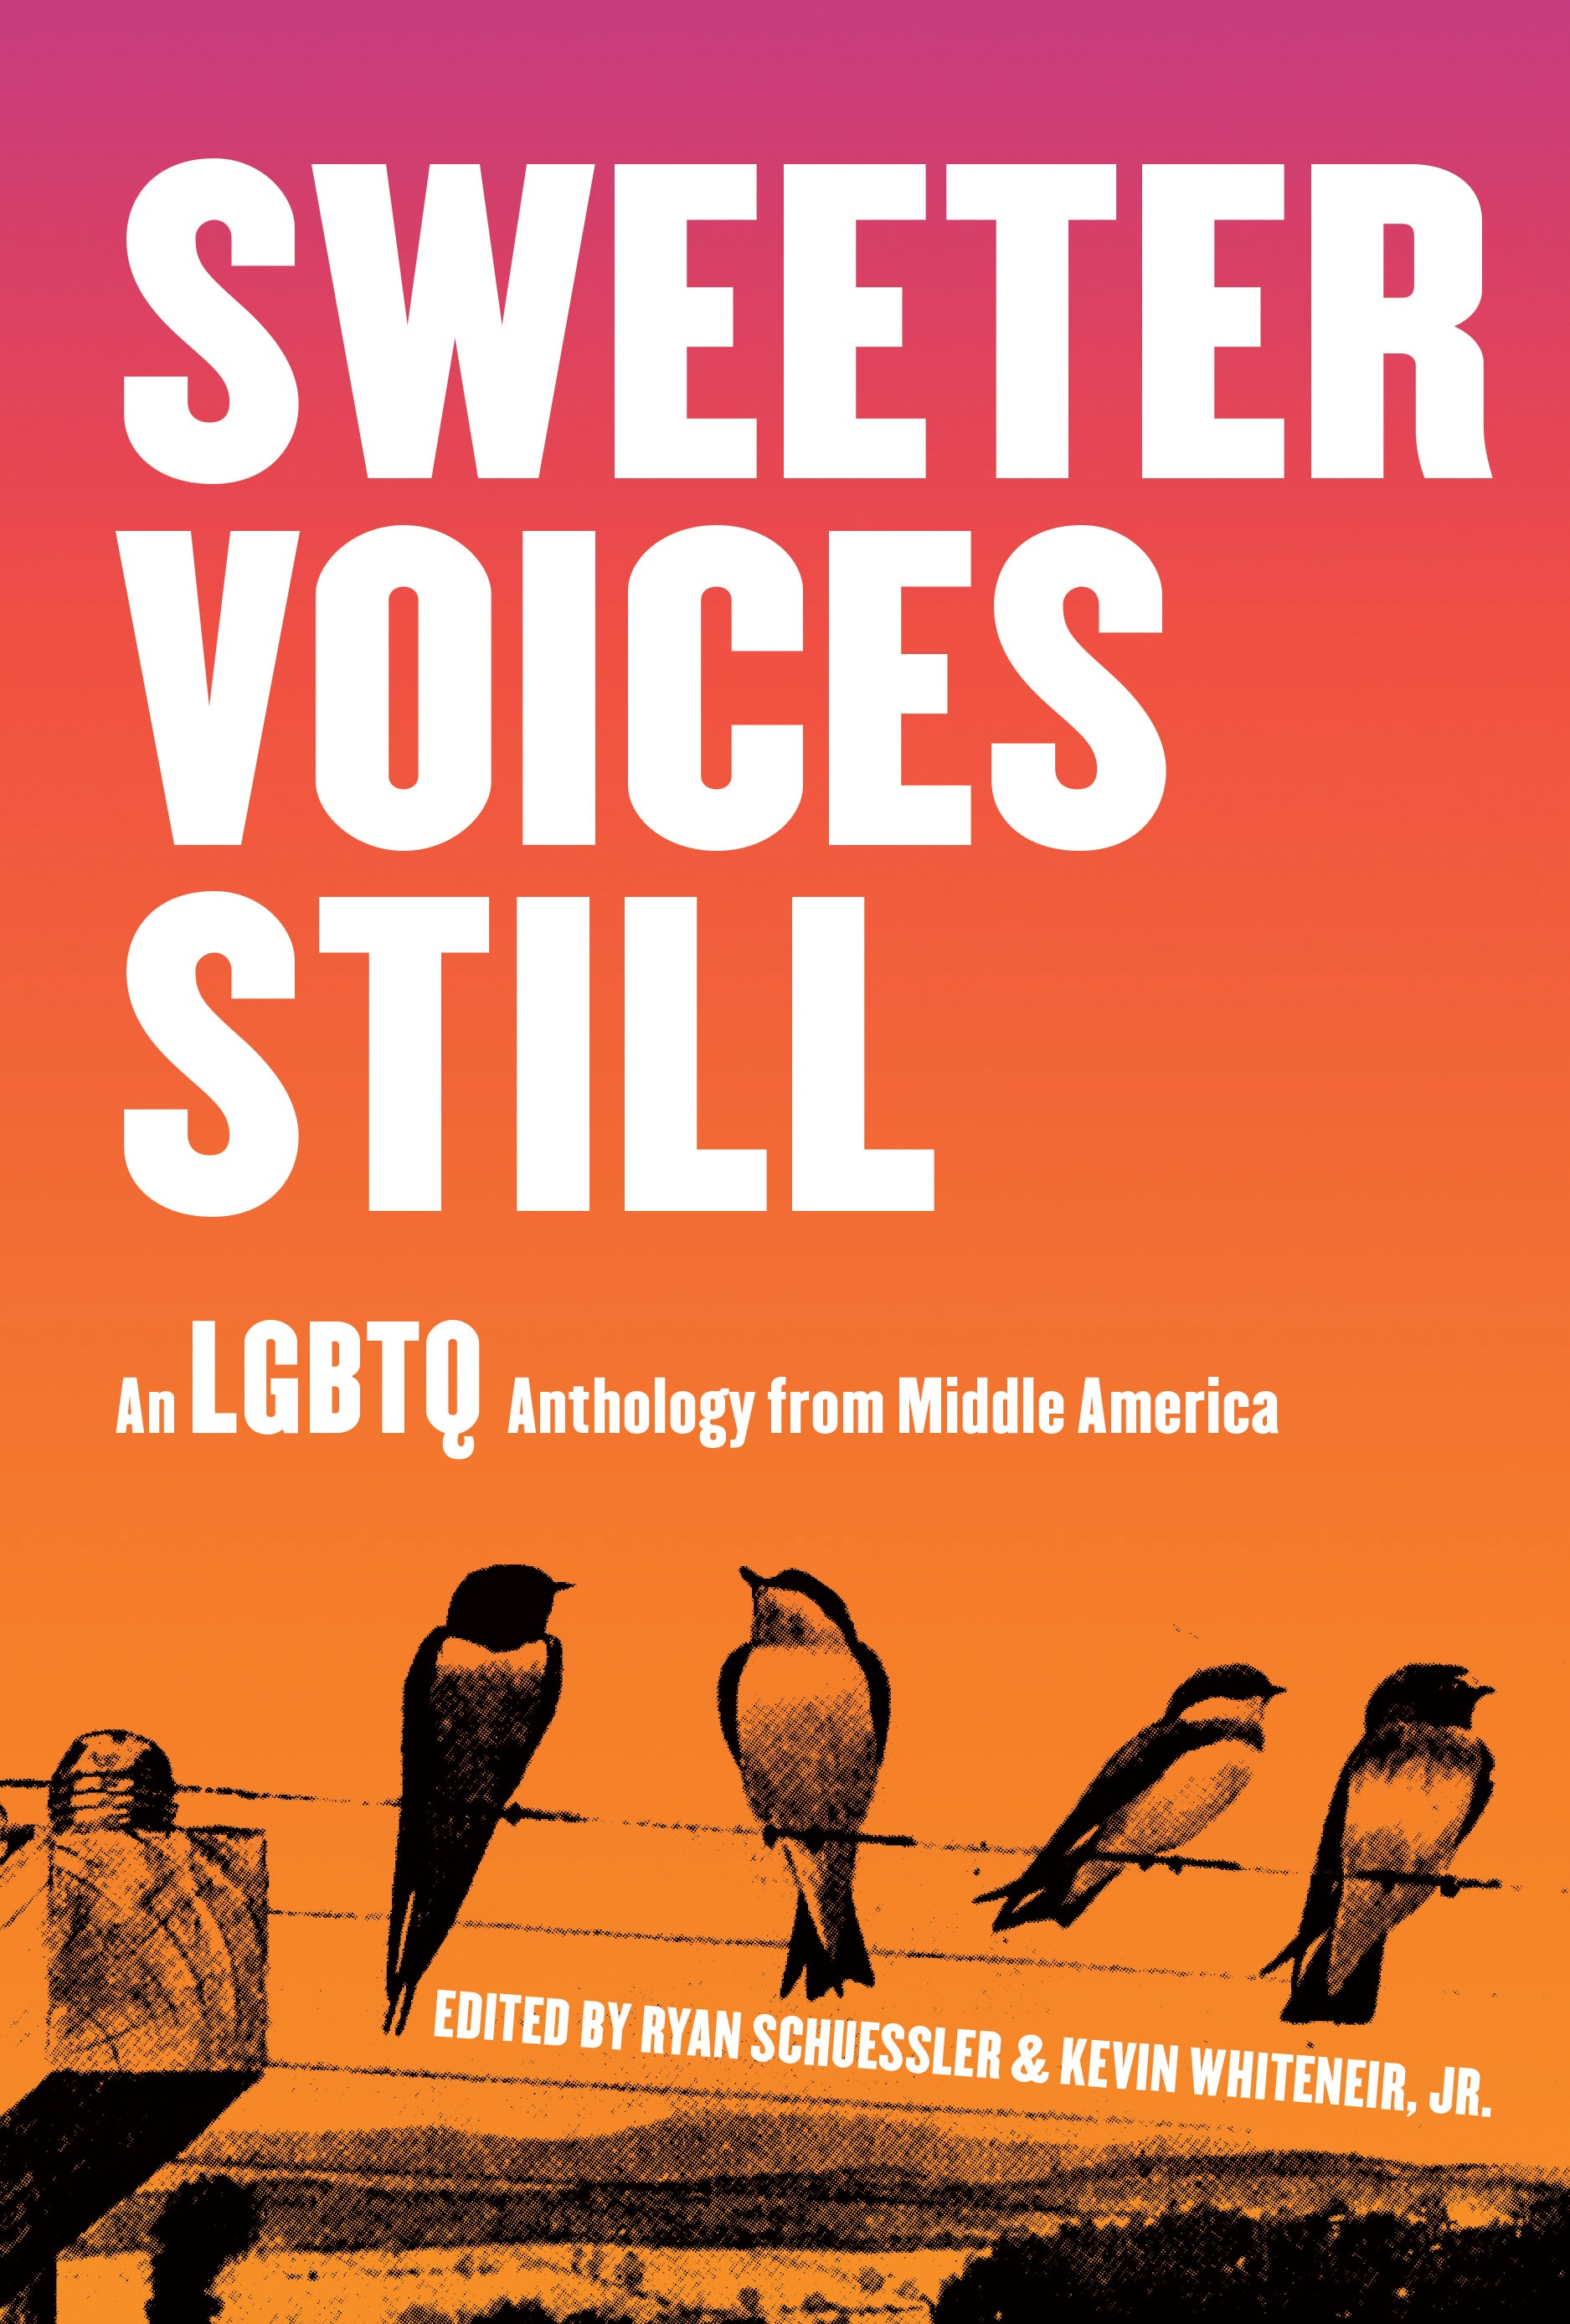 Sweeter Voices Still An LGBTQ Anthology from Middle America image